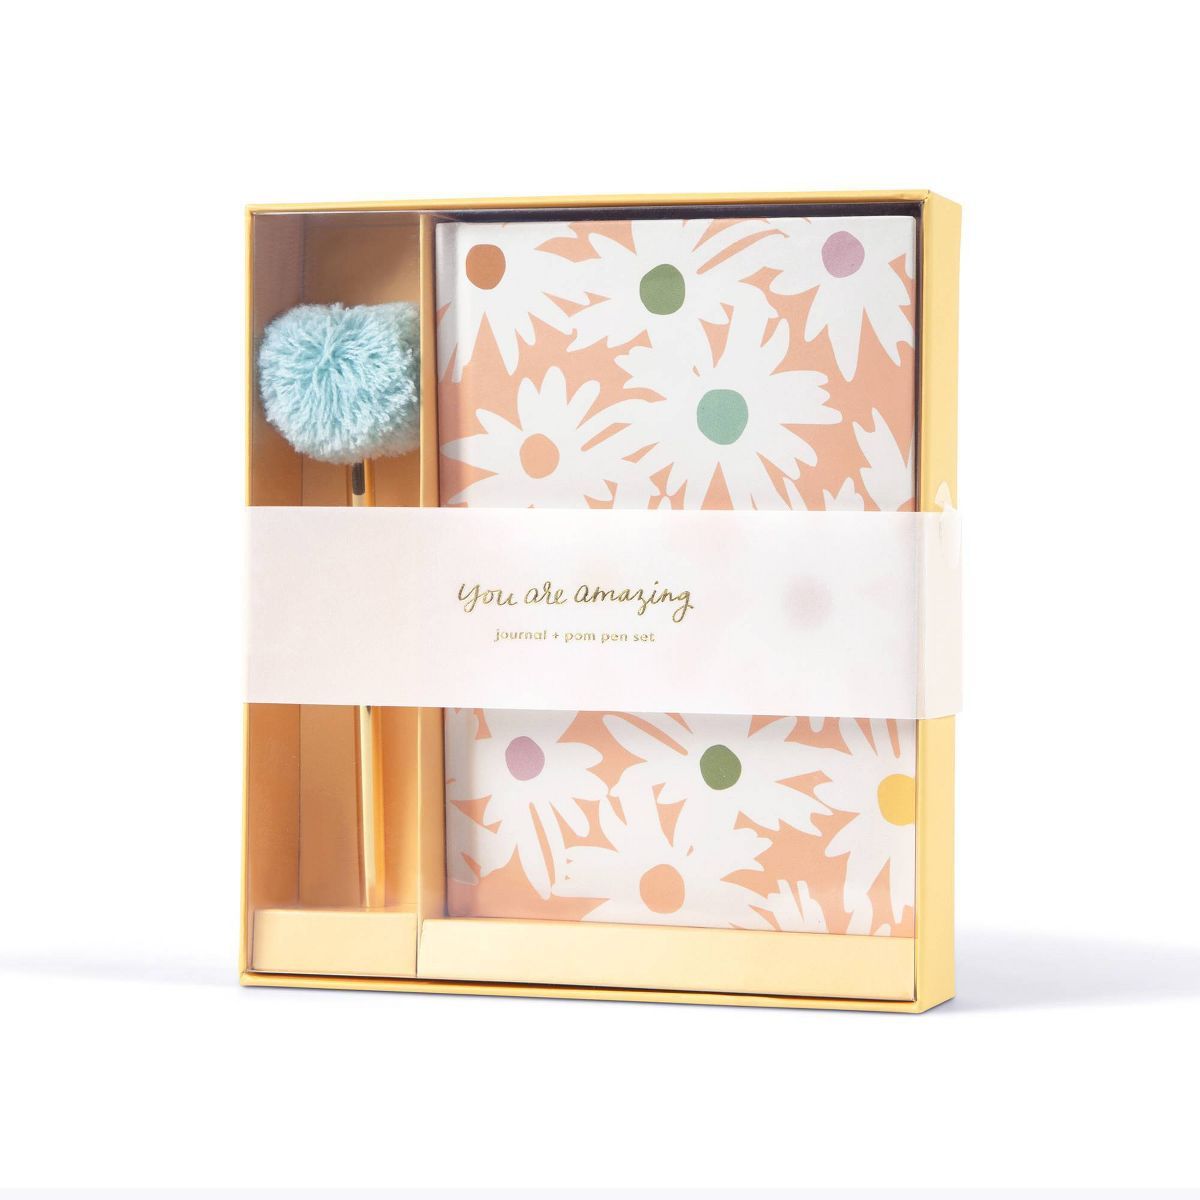 5"x7" Stationery Gifts Journal and Pom Pen Set Floral | Target